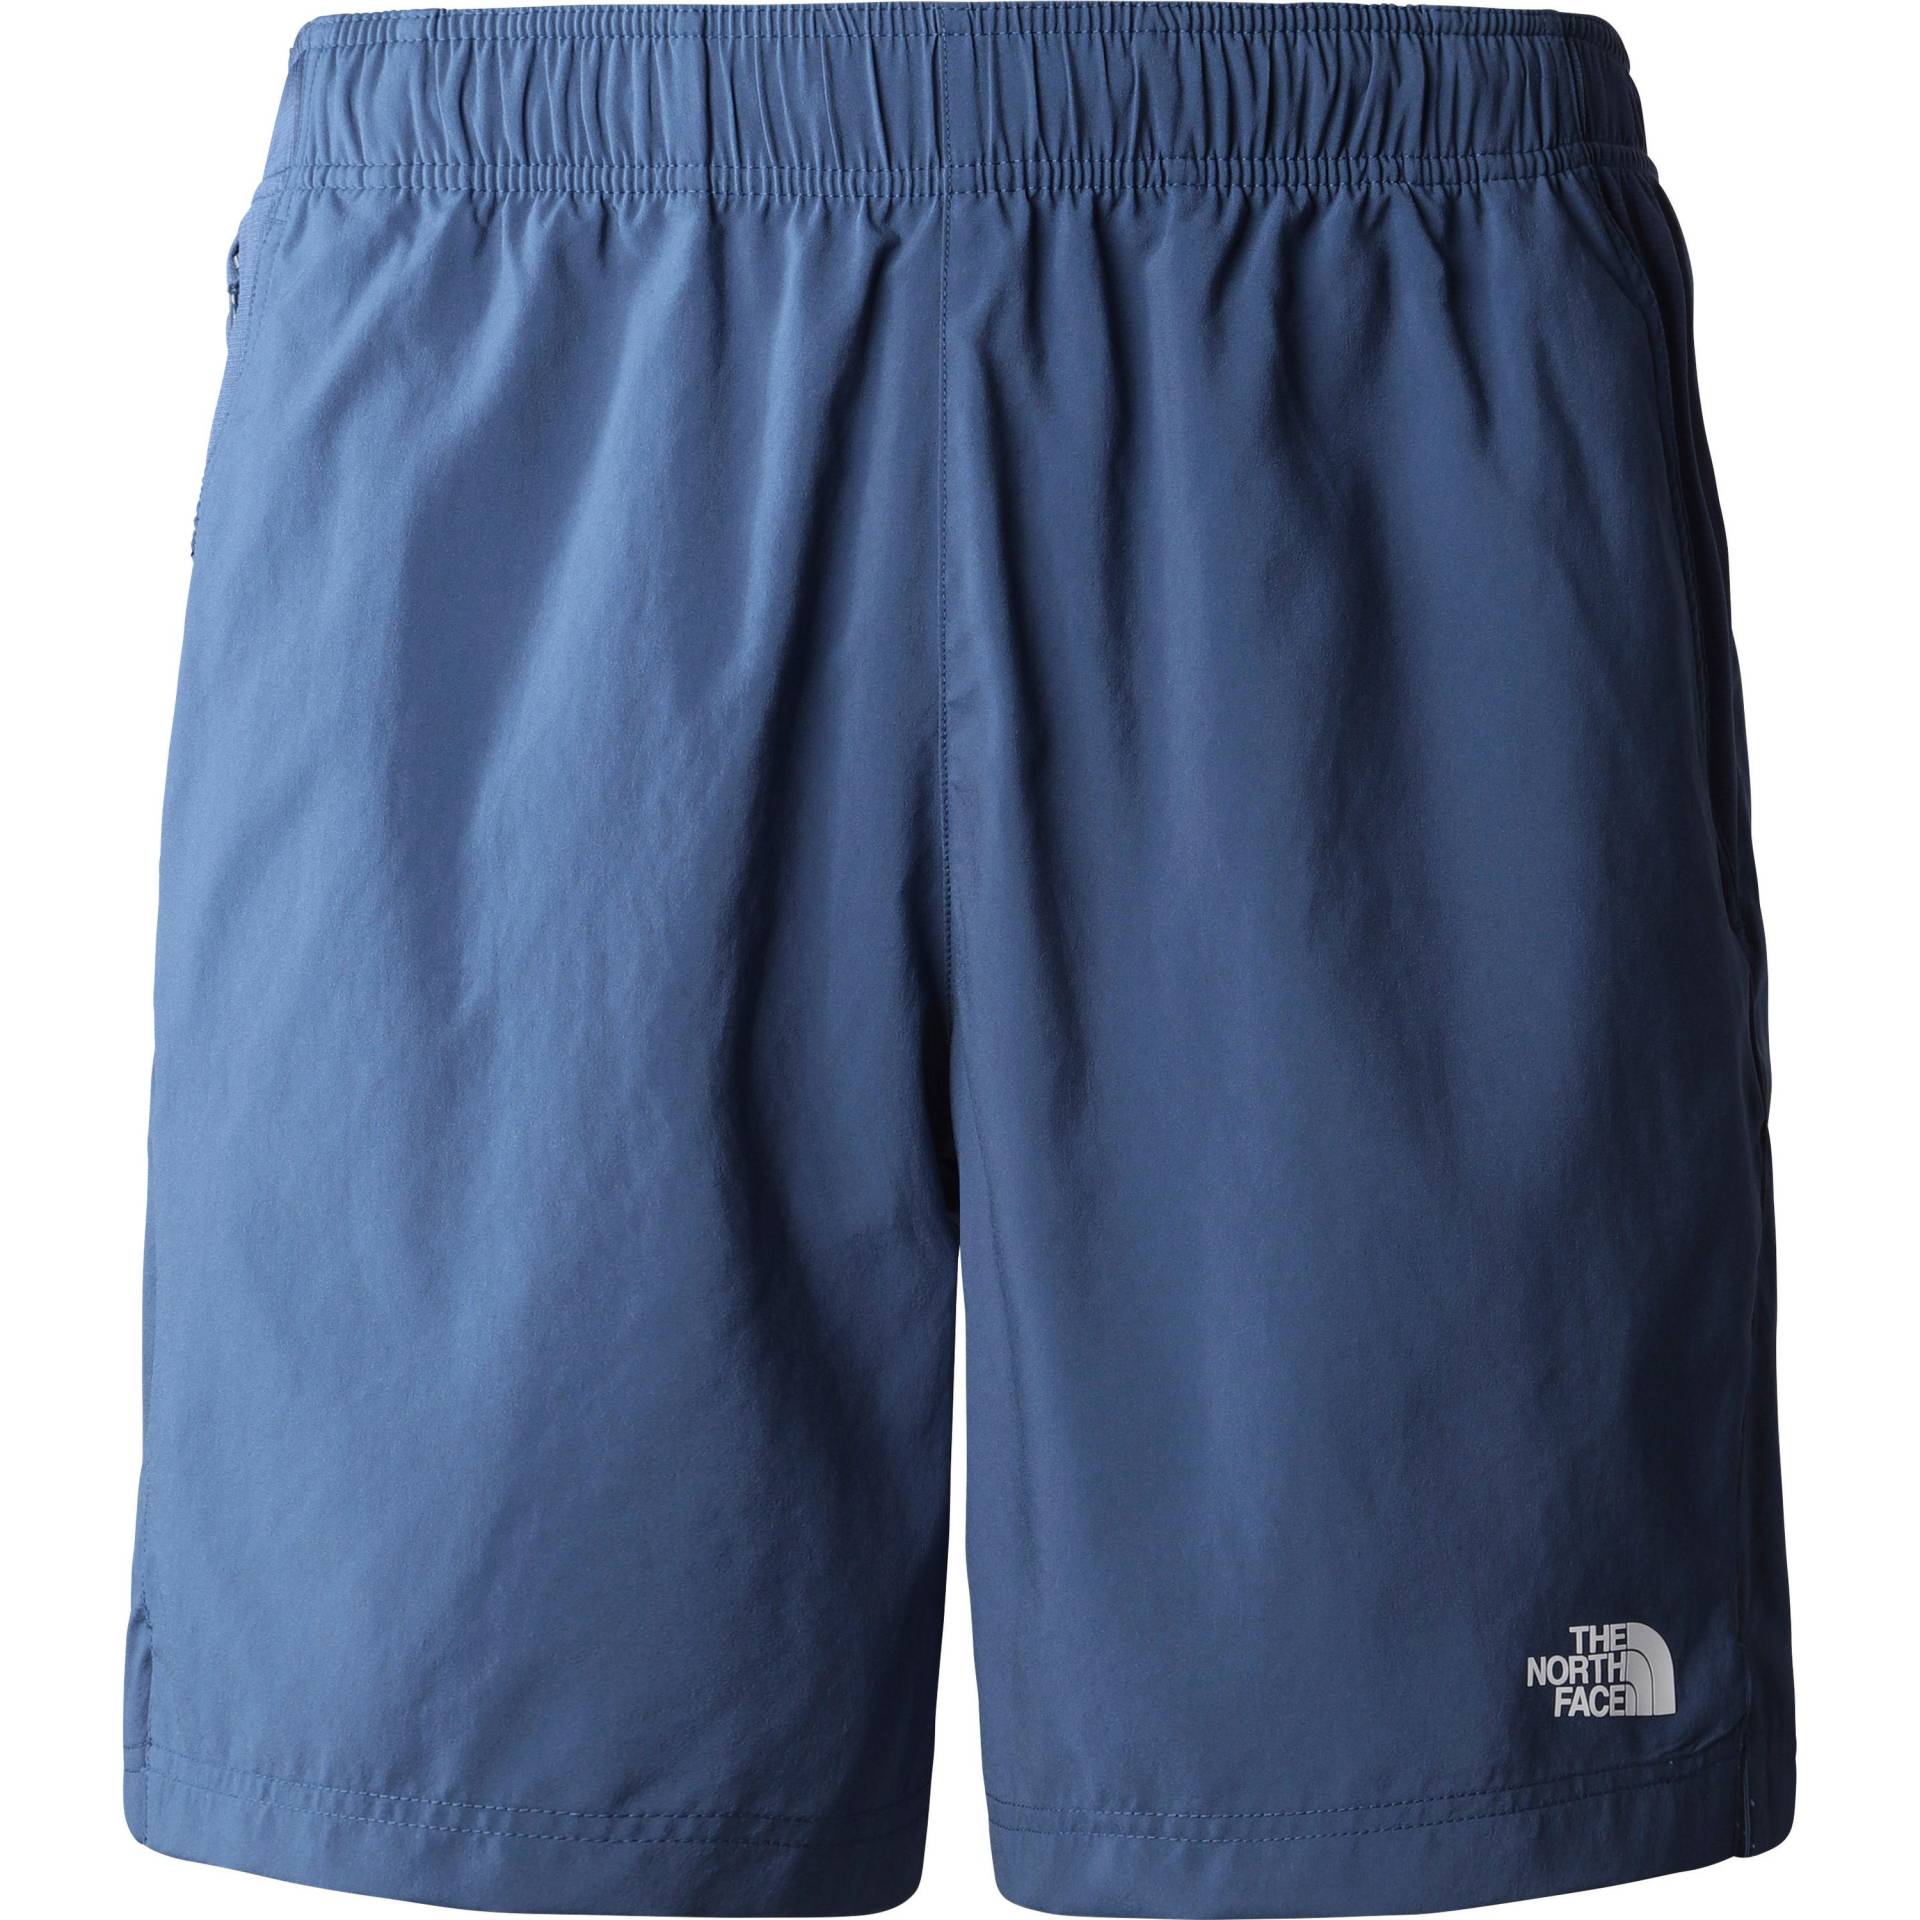 The North Face 24/7 Funktionsshorts Herren von The North Face